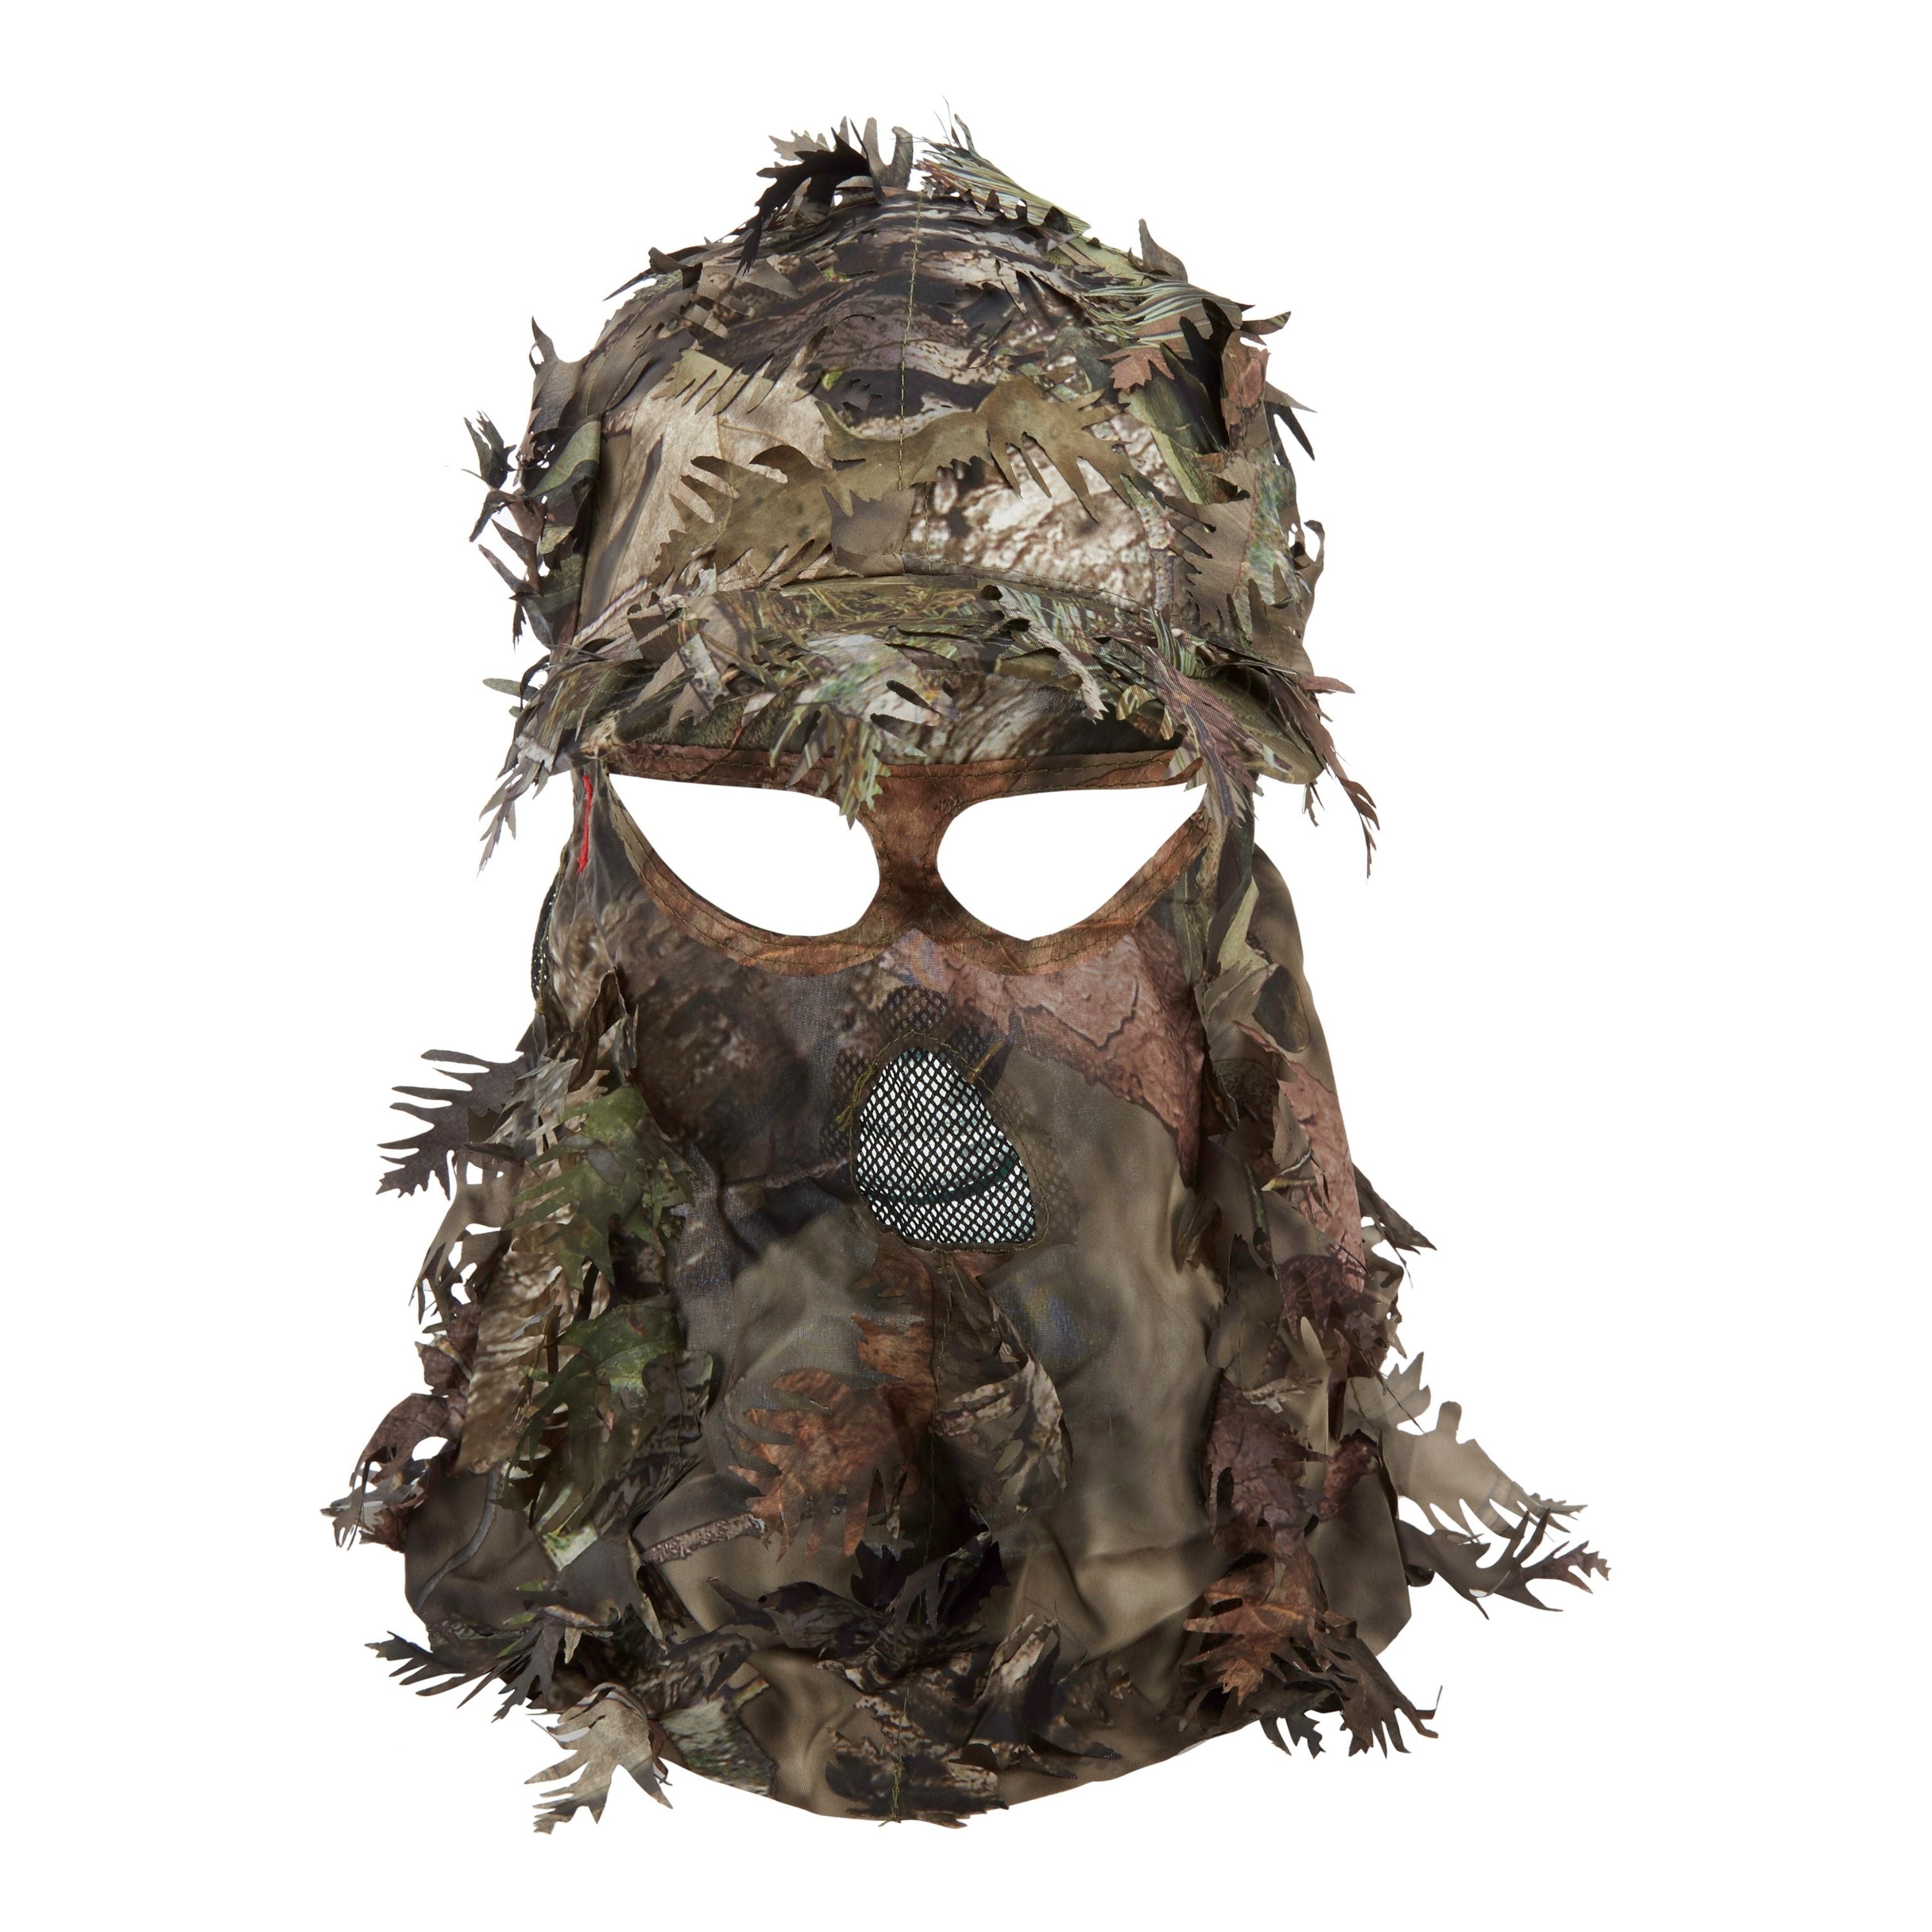 Realtree game face gear leafy break-up country cap with mask